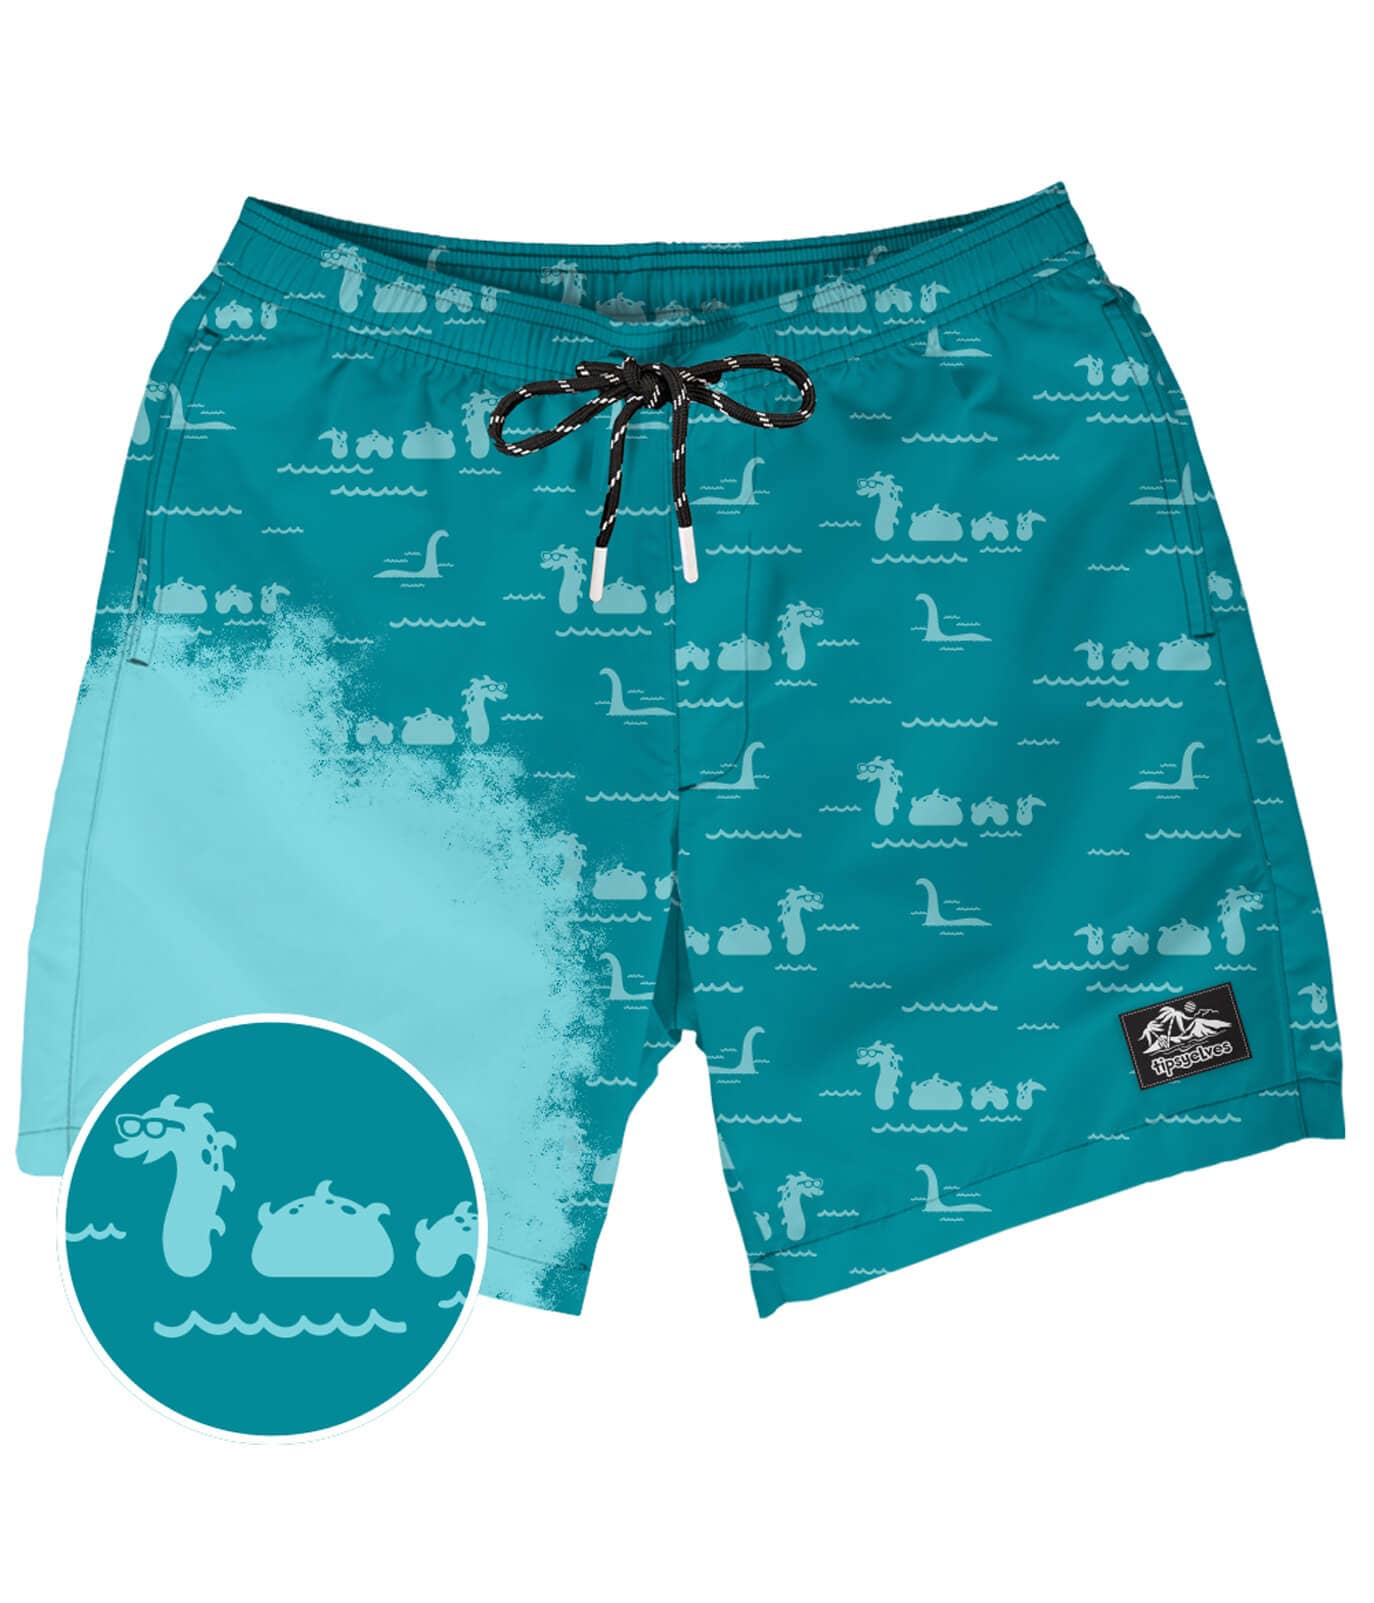 Nessie Color Changing Swim Trunks